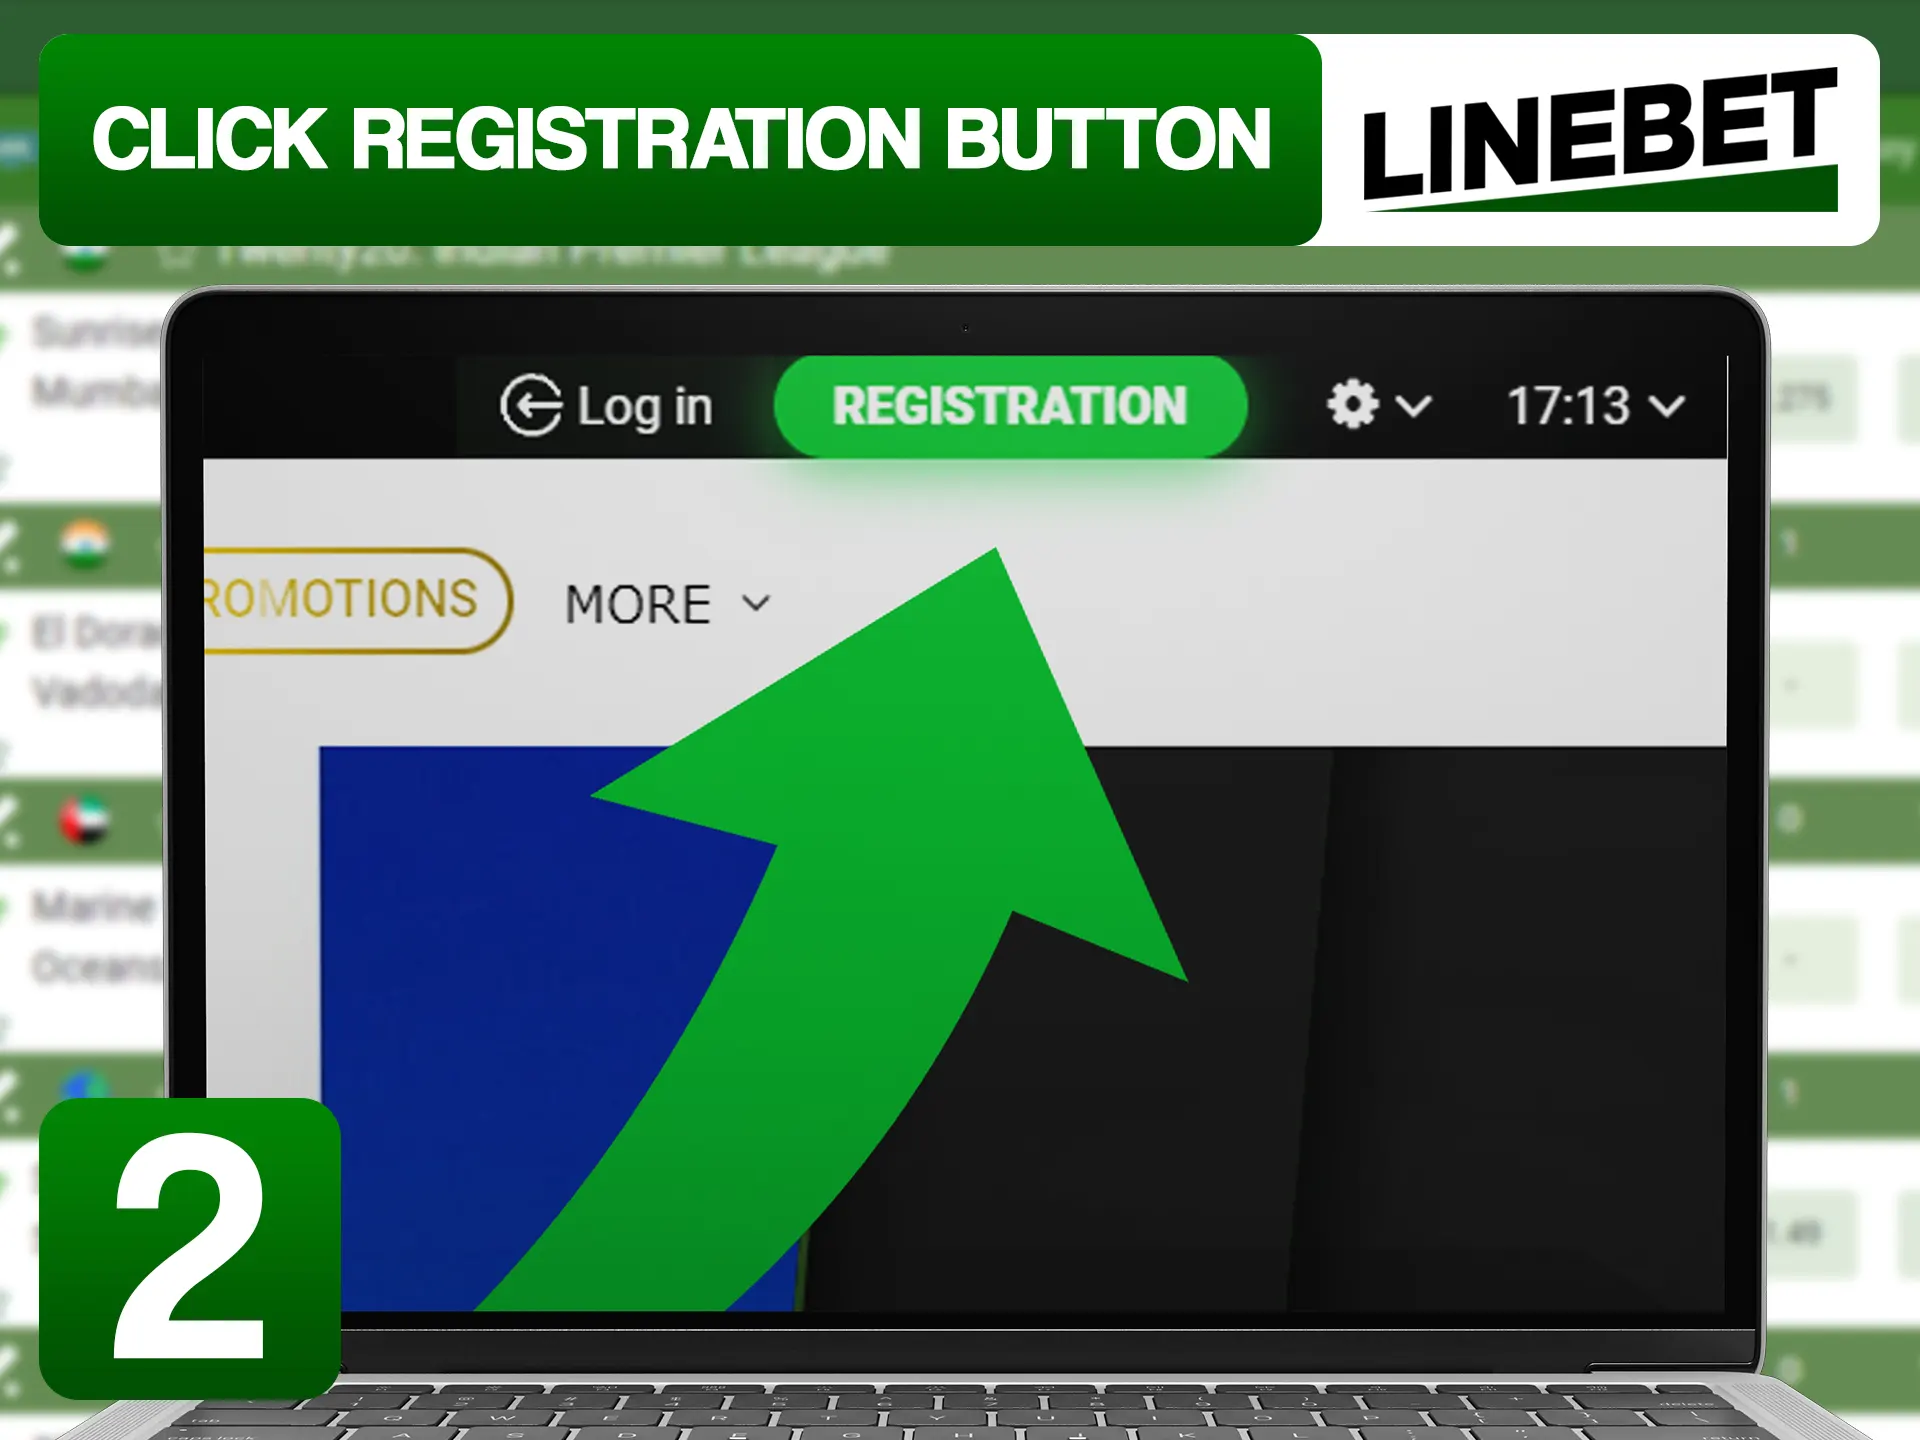 Click on registration button.